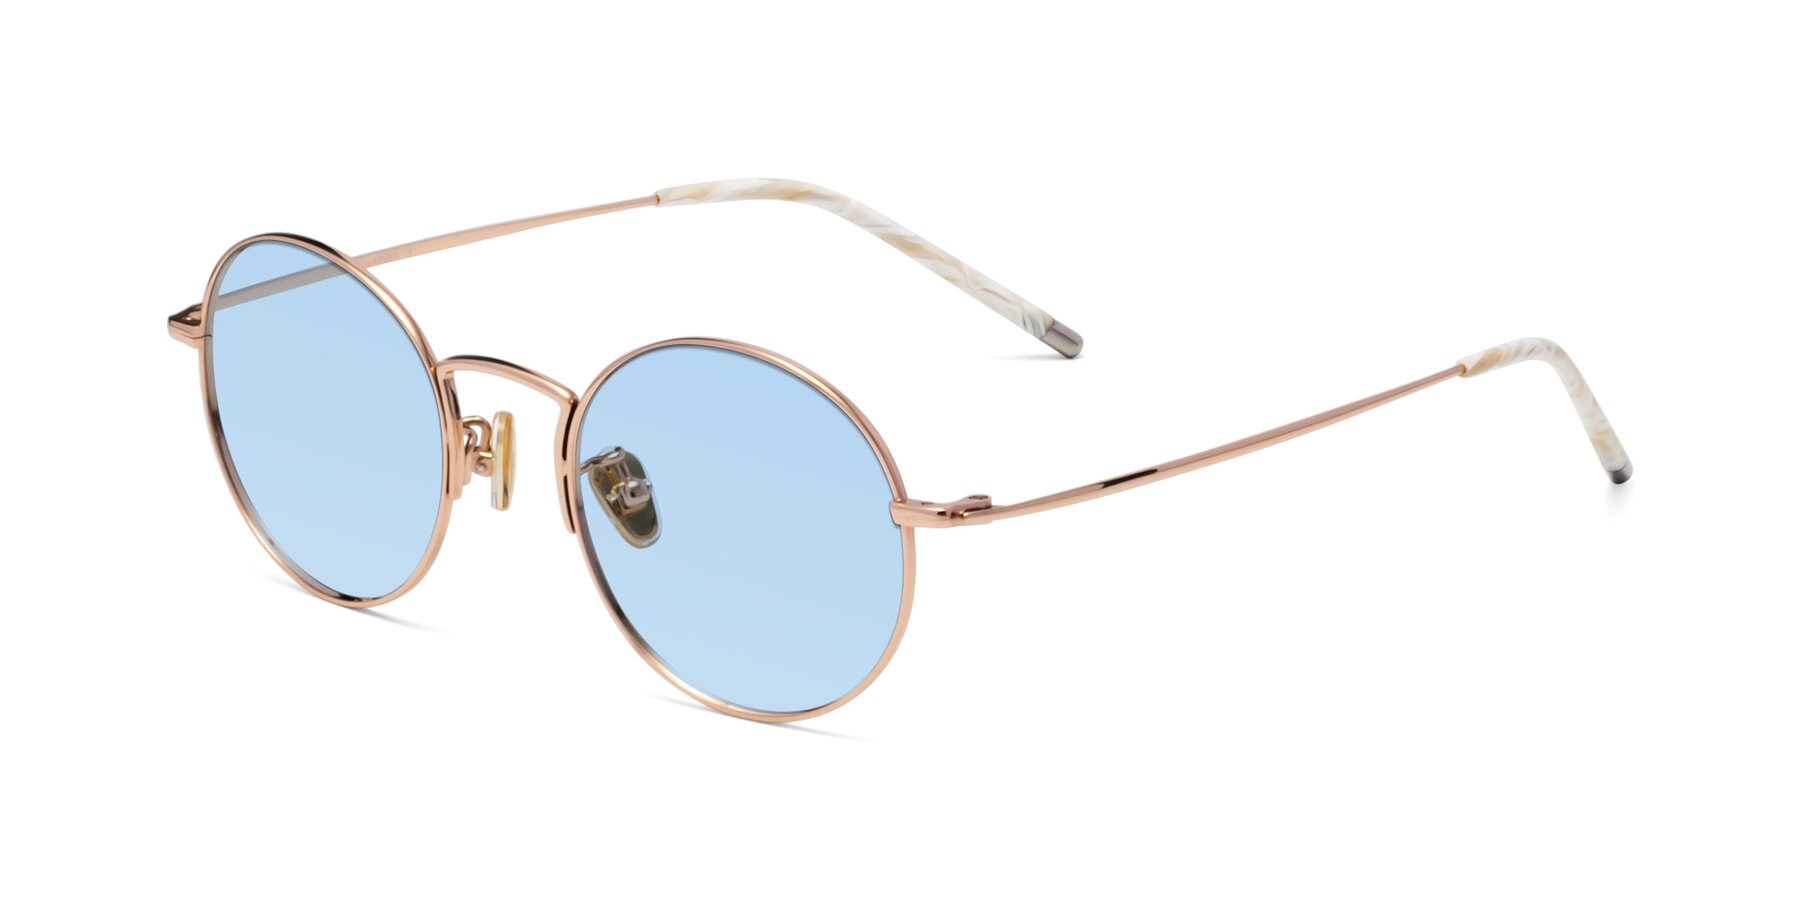 Angle of 80033 in Rose Gold with Light Blue Tinted Lenses